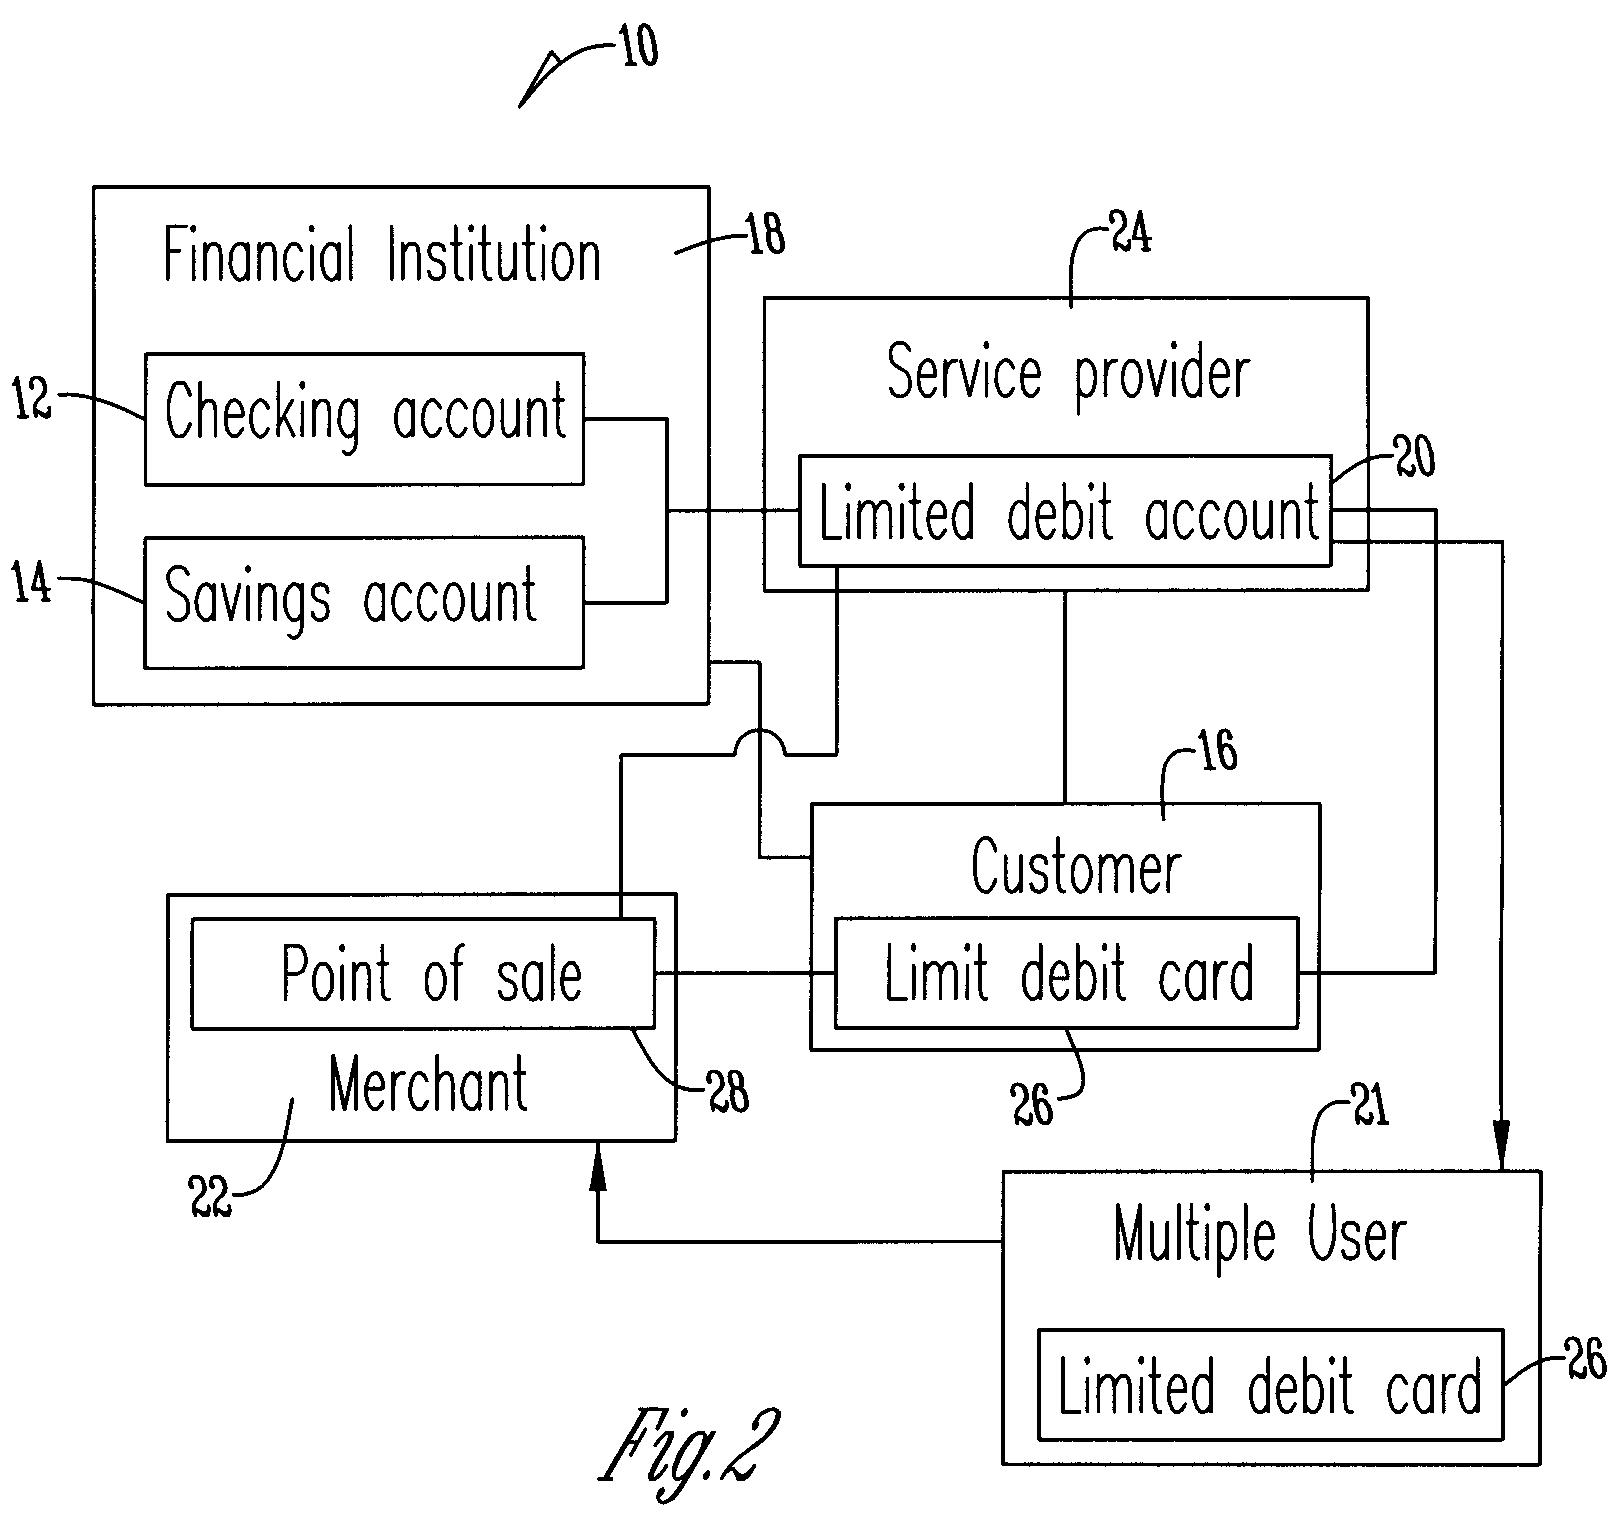 Method for limiting debit card transactions